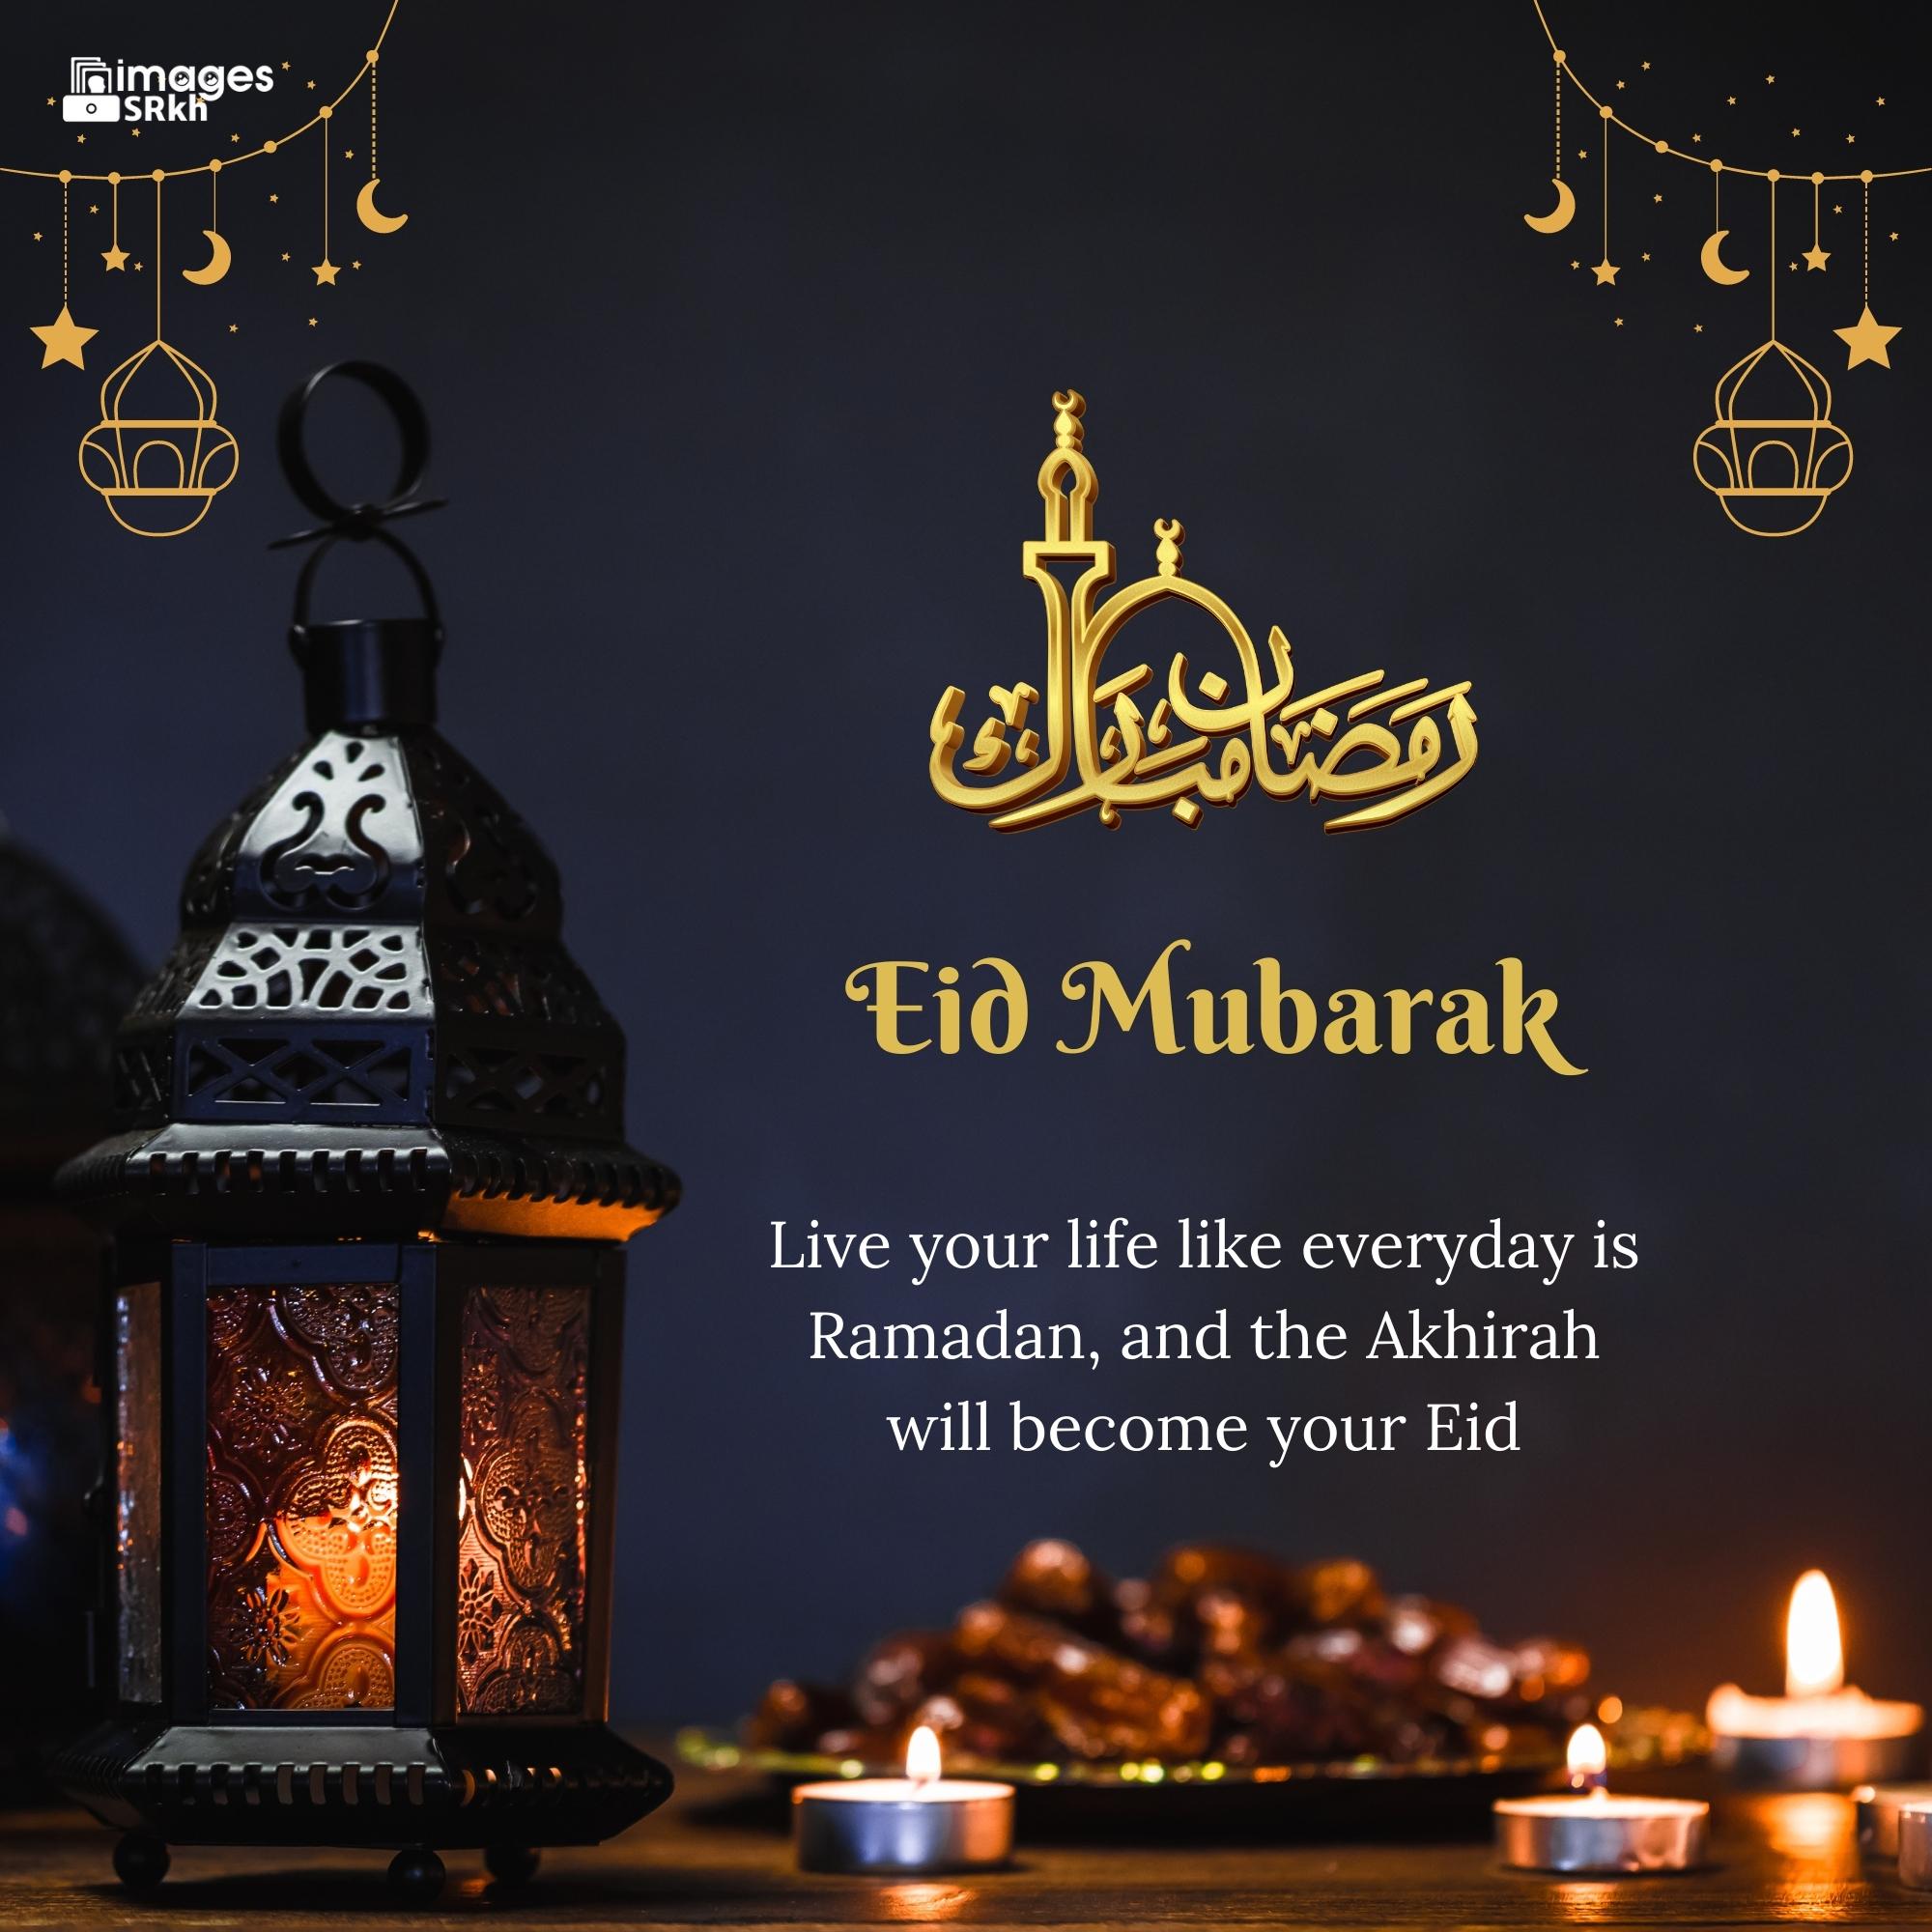 Eid Mubarak Images (3) | Download free in Hd Quality | imagesSRkh